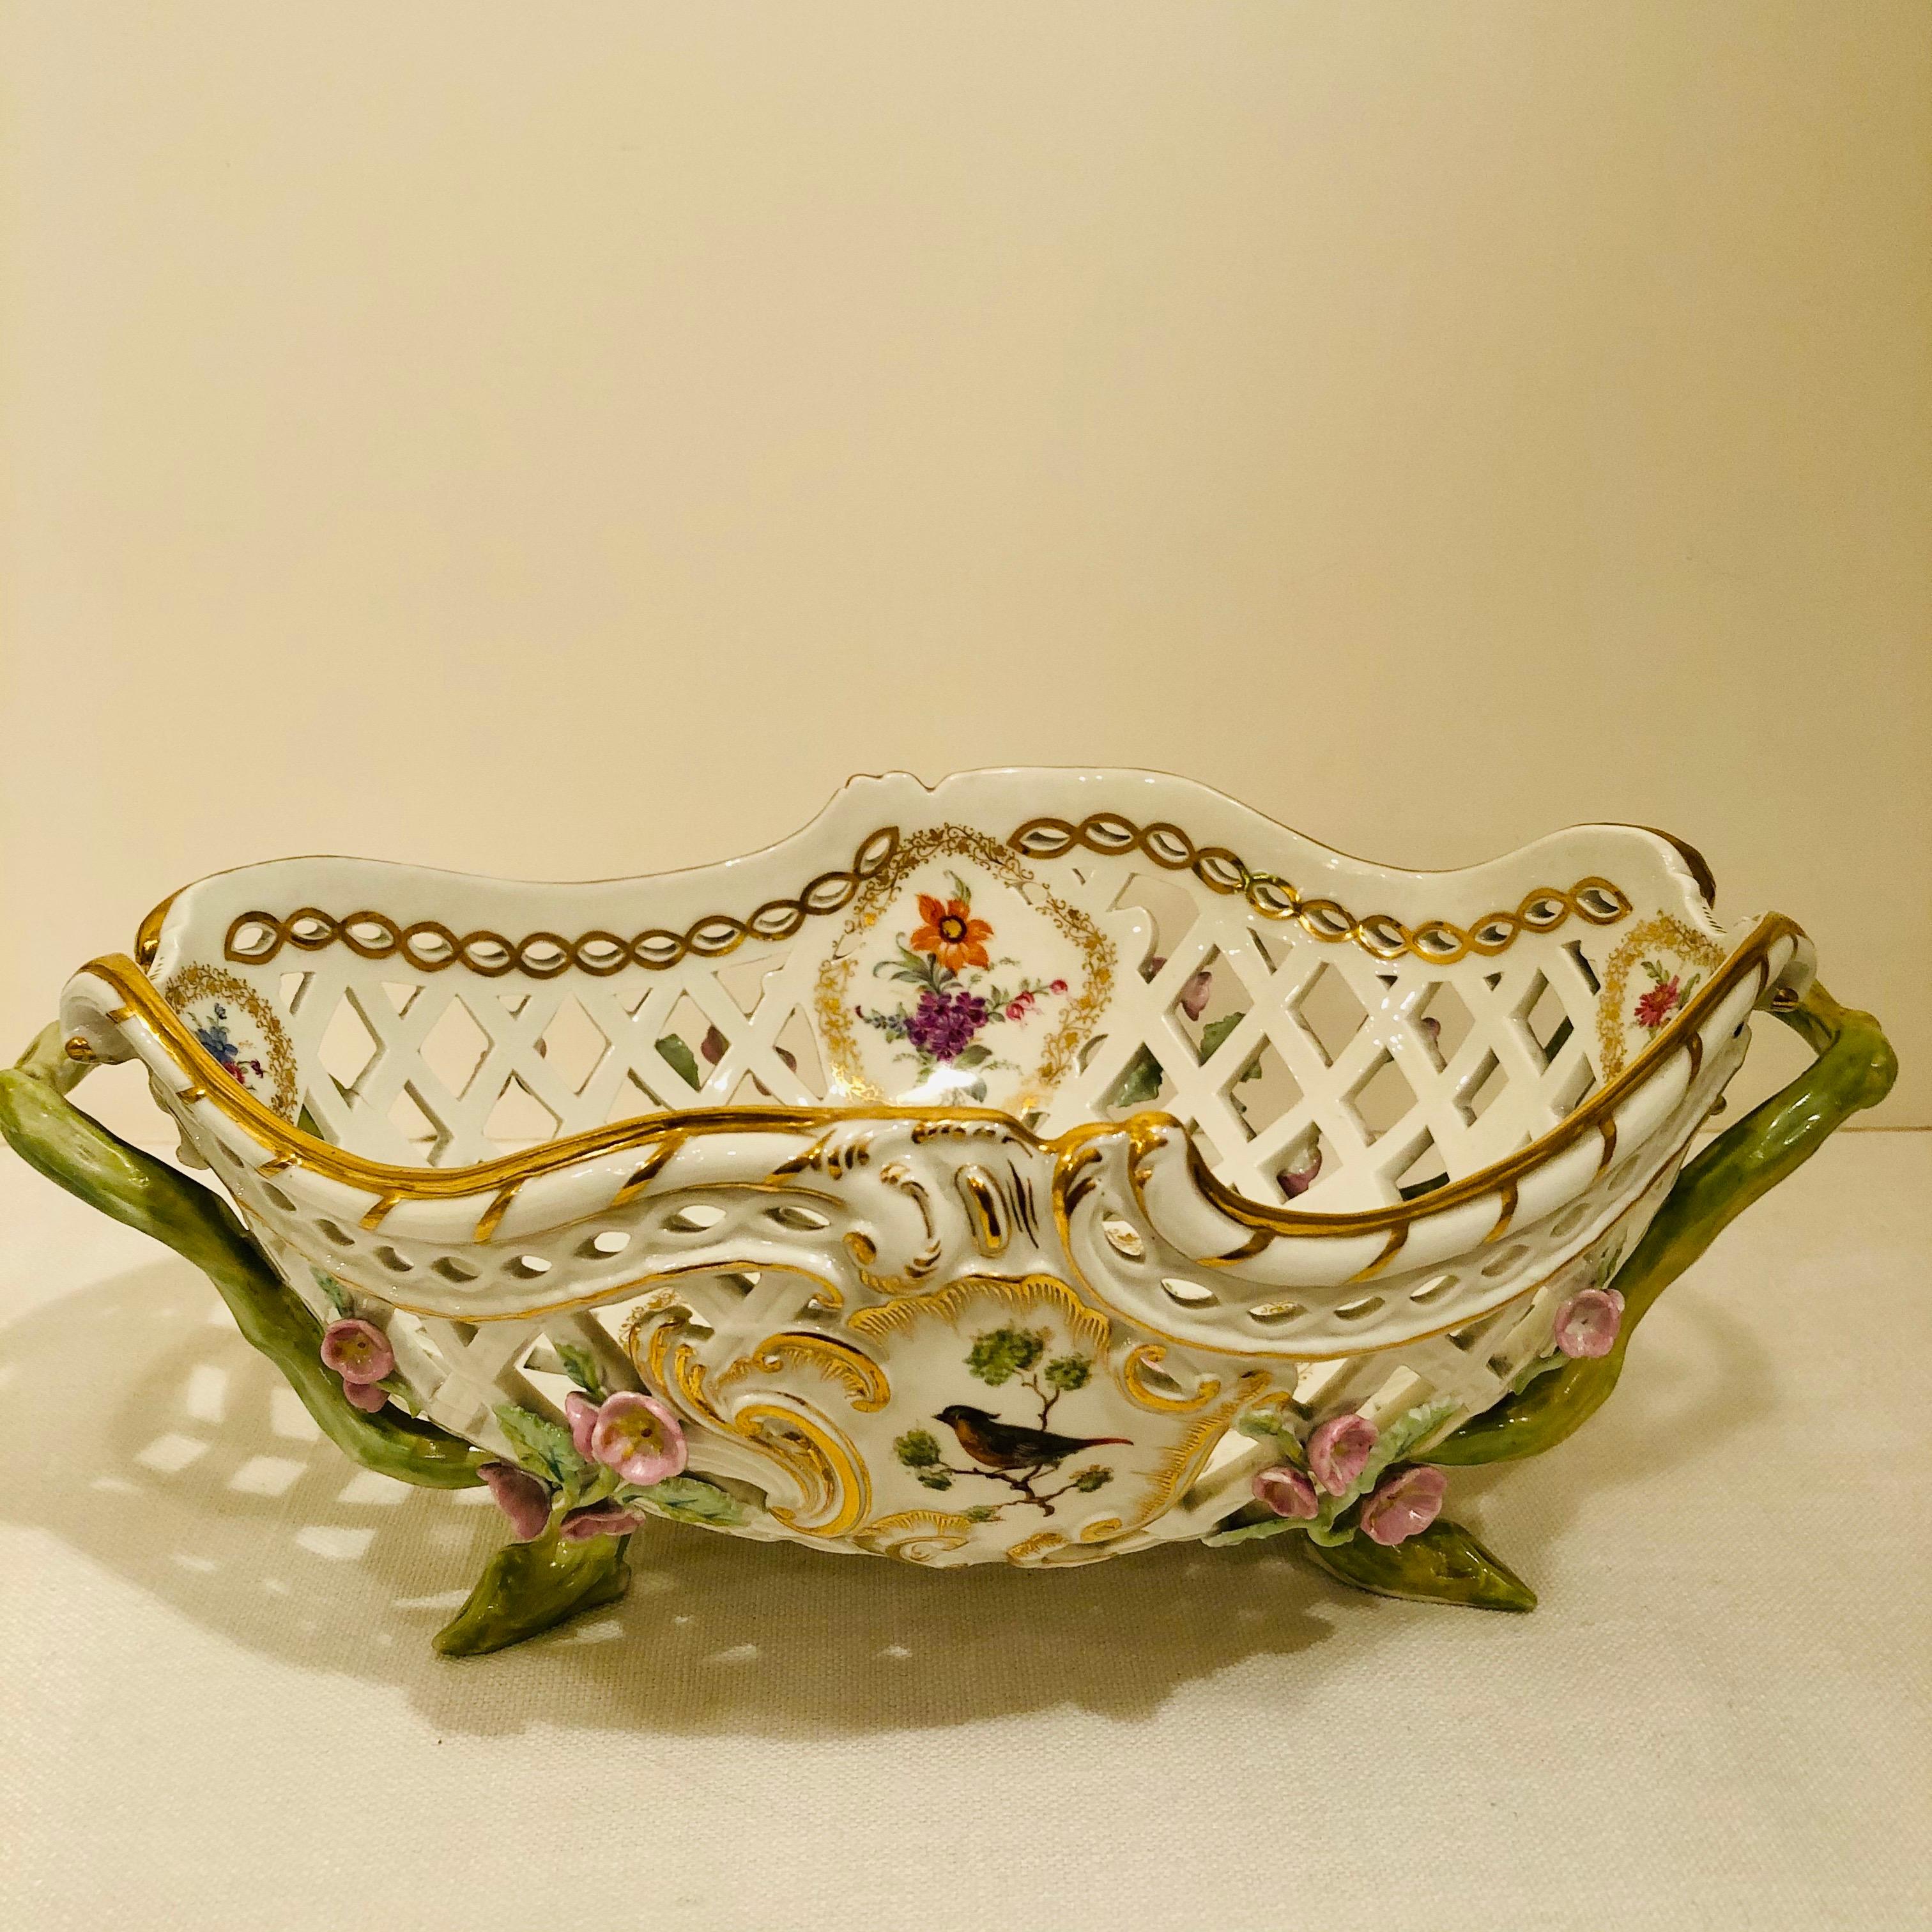 Romantic KPM Openwork Bowl with Raised Pink Flowers and Painted Birds on Both Sides For Sale